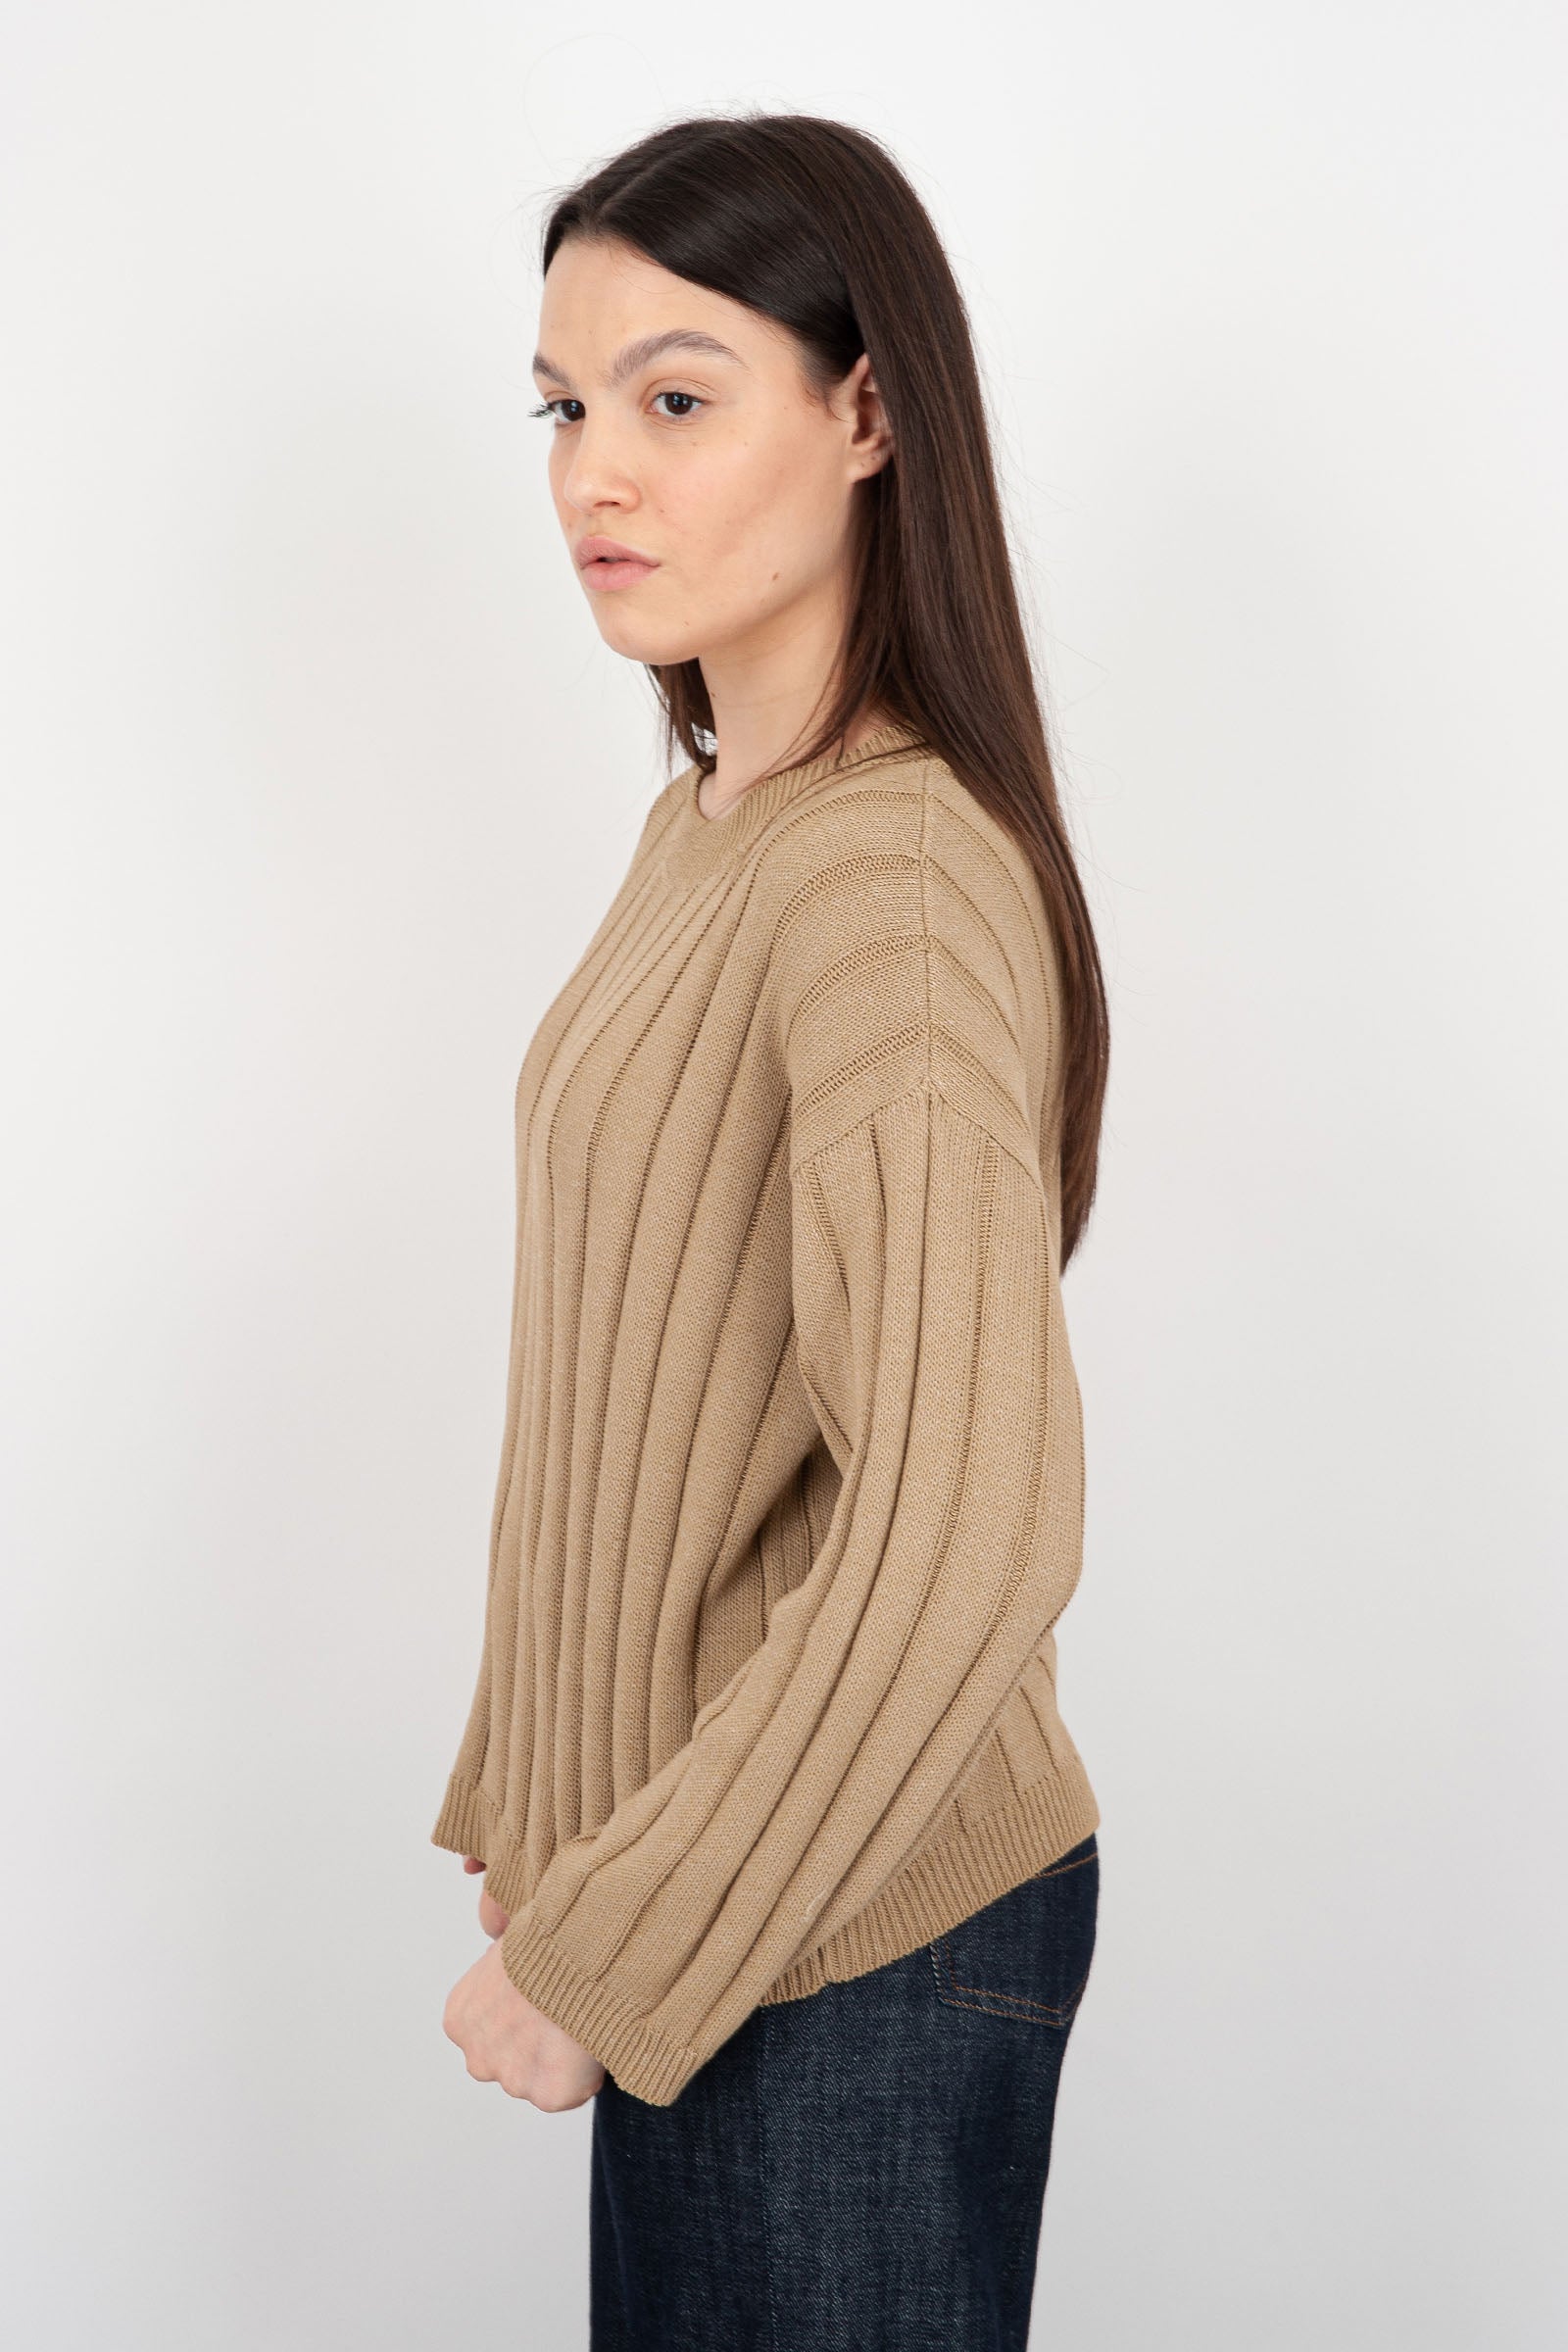 Grifoni Ribbed Sand Knit in Cotton/Polyamide - 3